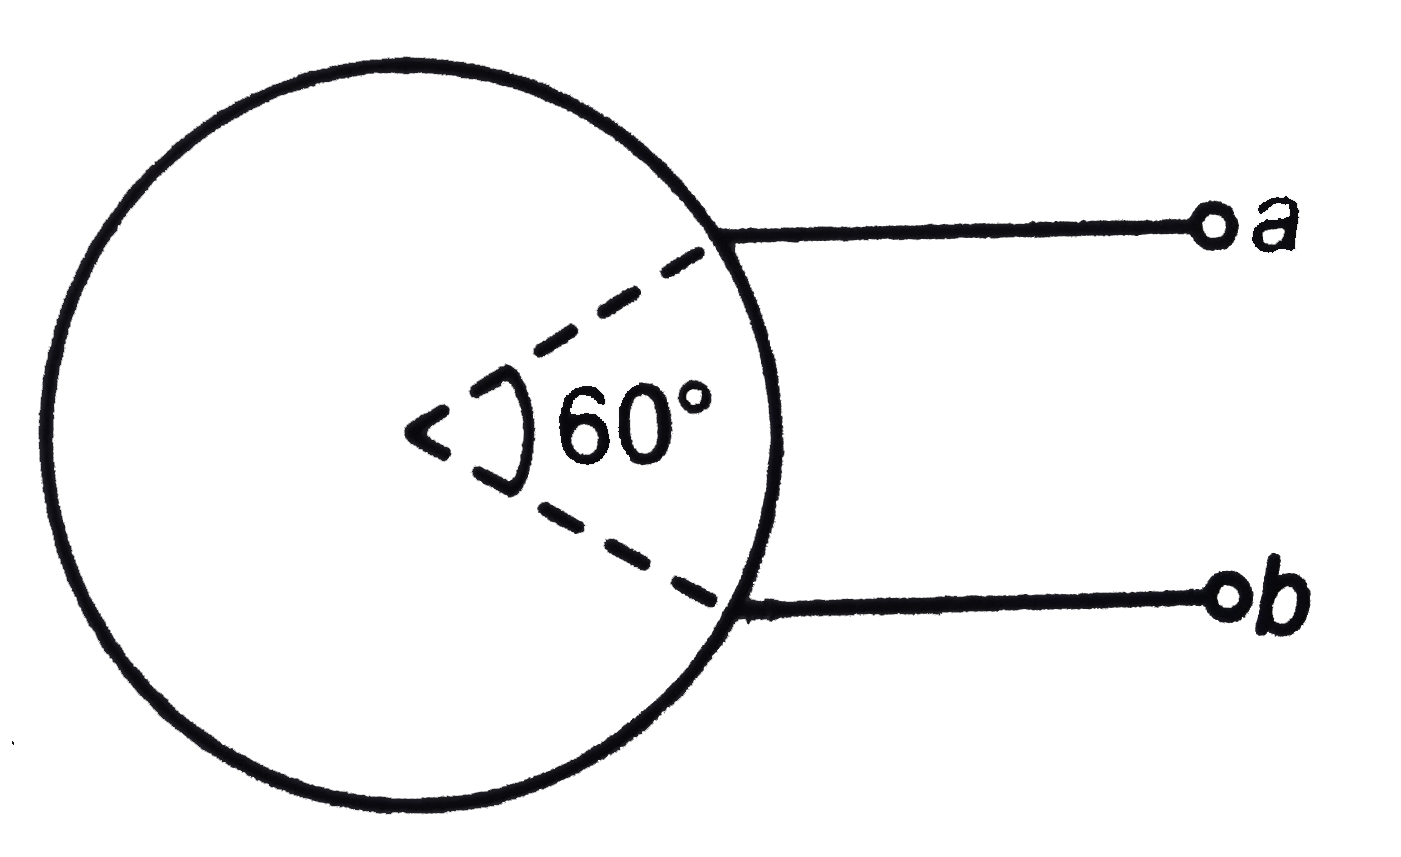 A uniform wire of resistance 18 Omega is bent in the form of a circle. The effective resistance across the points a and b is